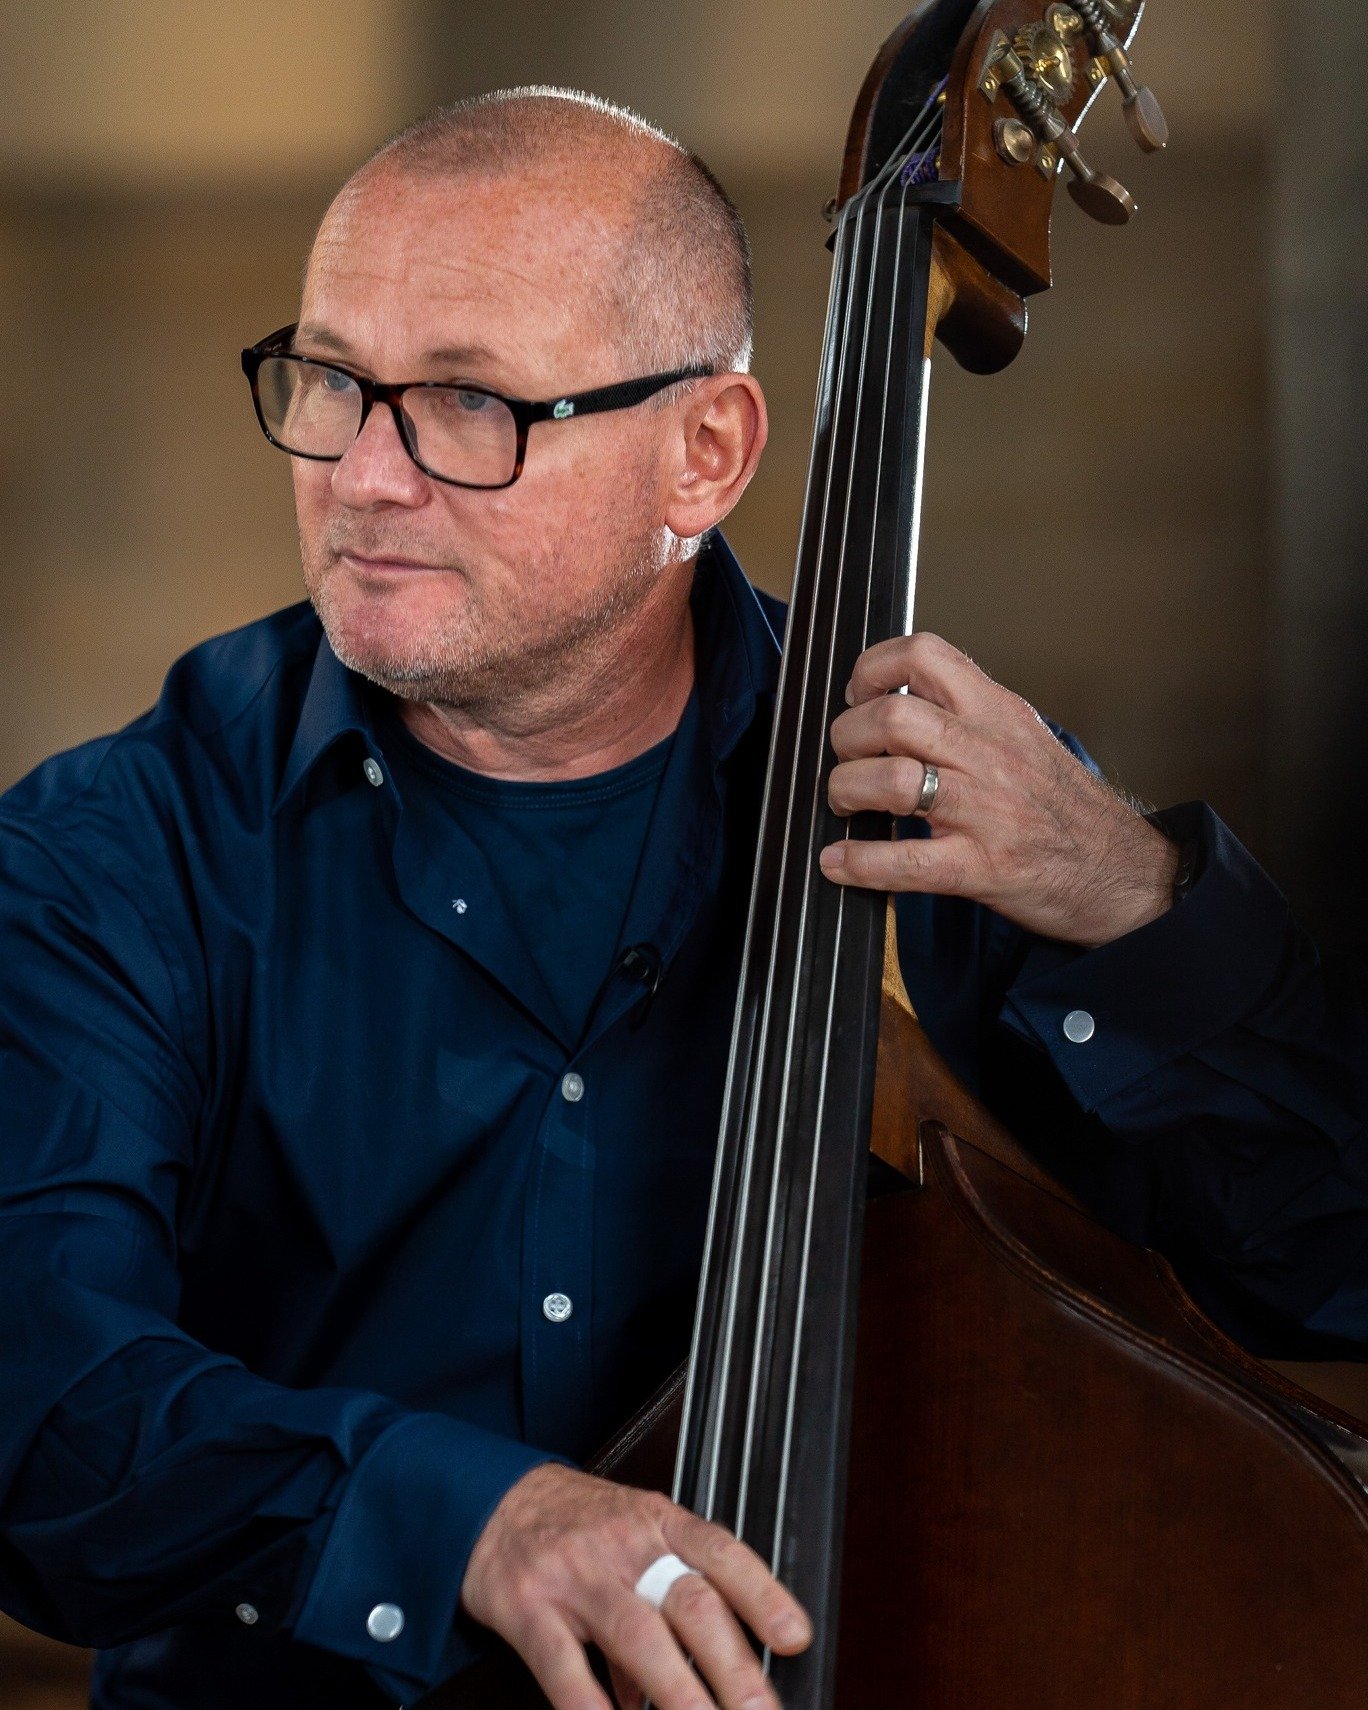 Happy birthday to the wonderful bassist and educator, Zoltan Dekany 🥳🥳🥳
We have featured Zoltan in these two wonderful interviews that are freely available at DiscoverDoubleBass.com

#doublebass #contrabass #uprightbass #baixoacustico #baixonatura